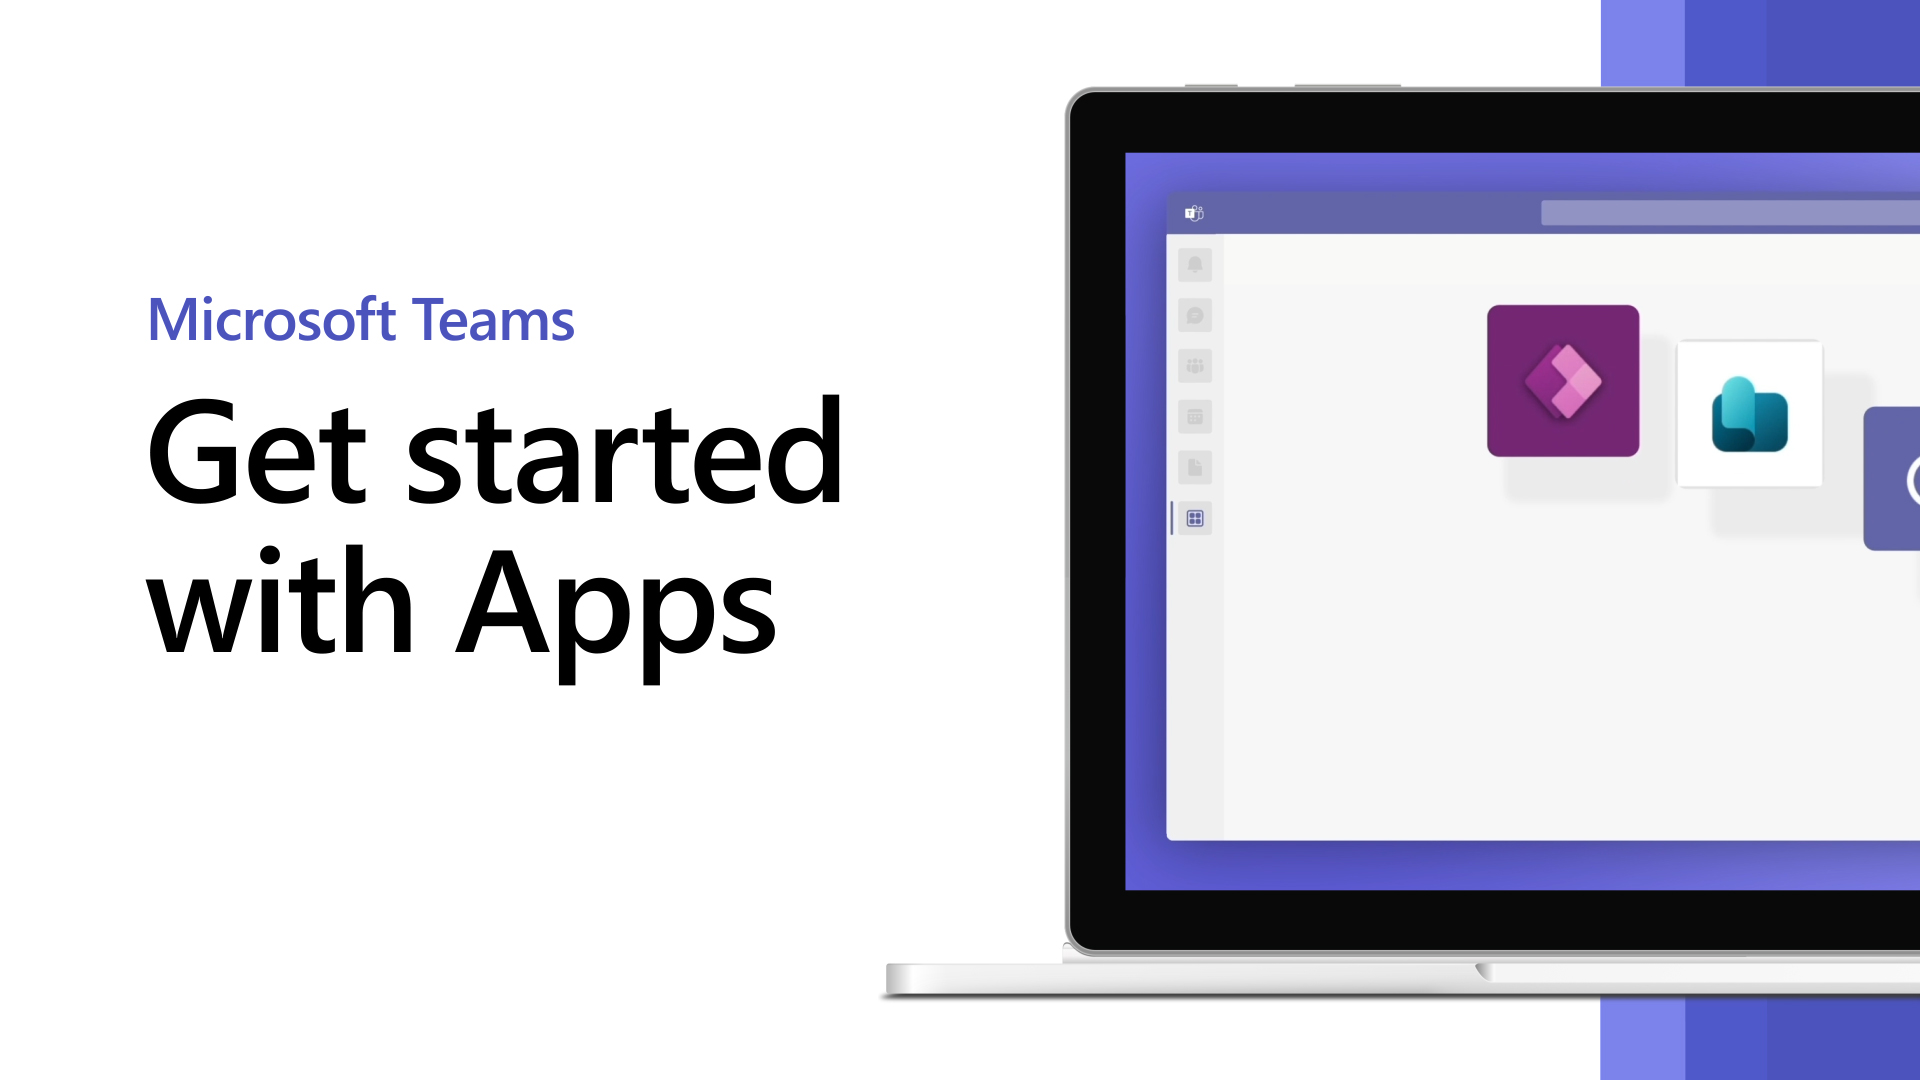 Get started with Microsoft Teams - Microsoft Support